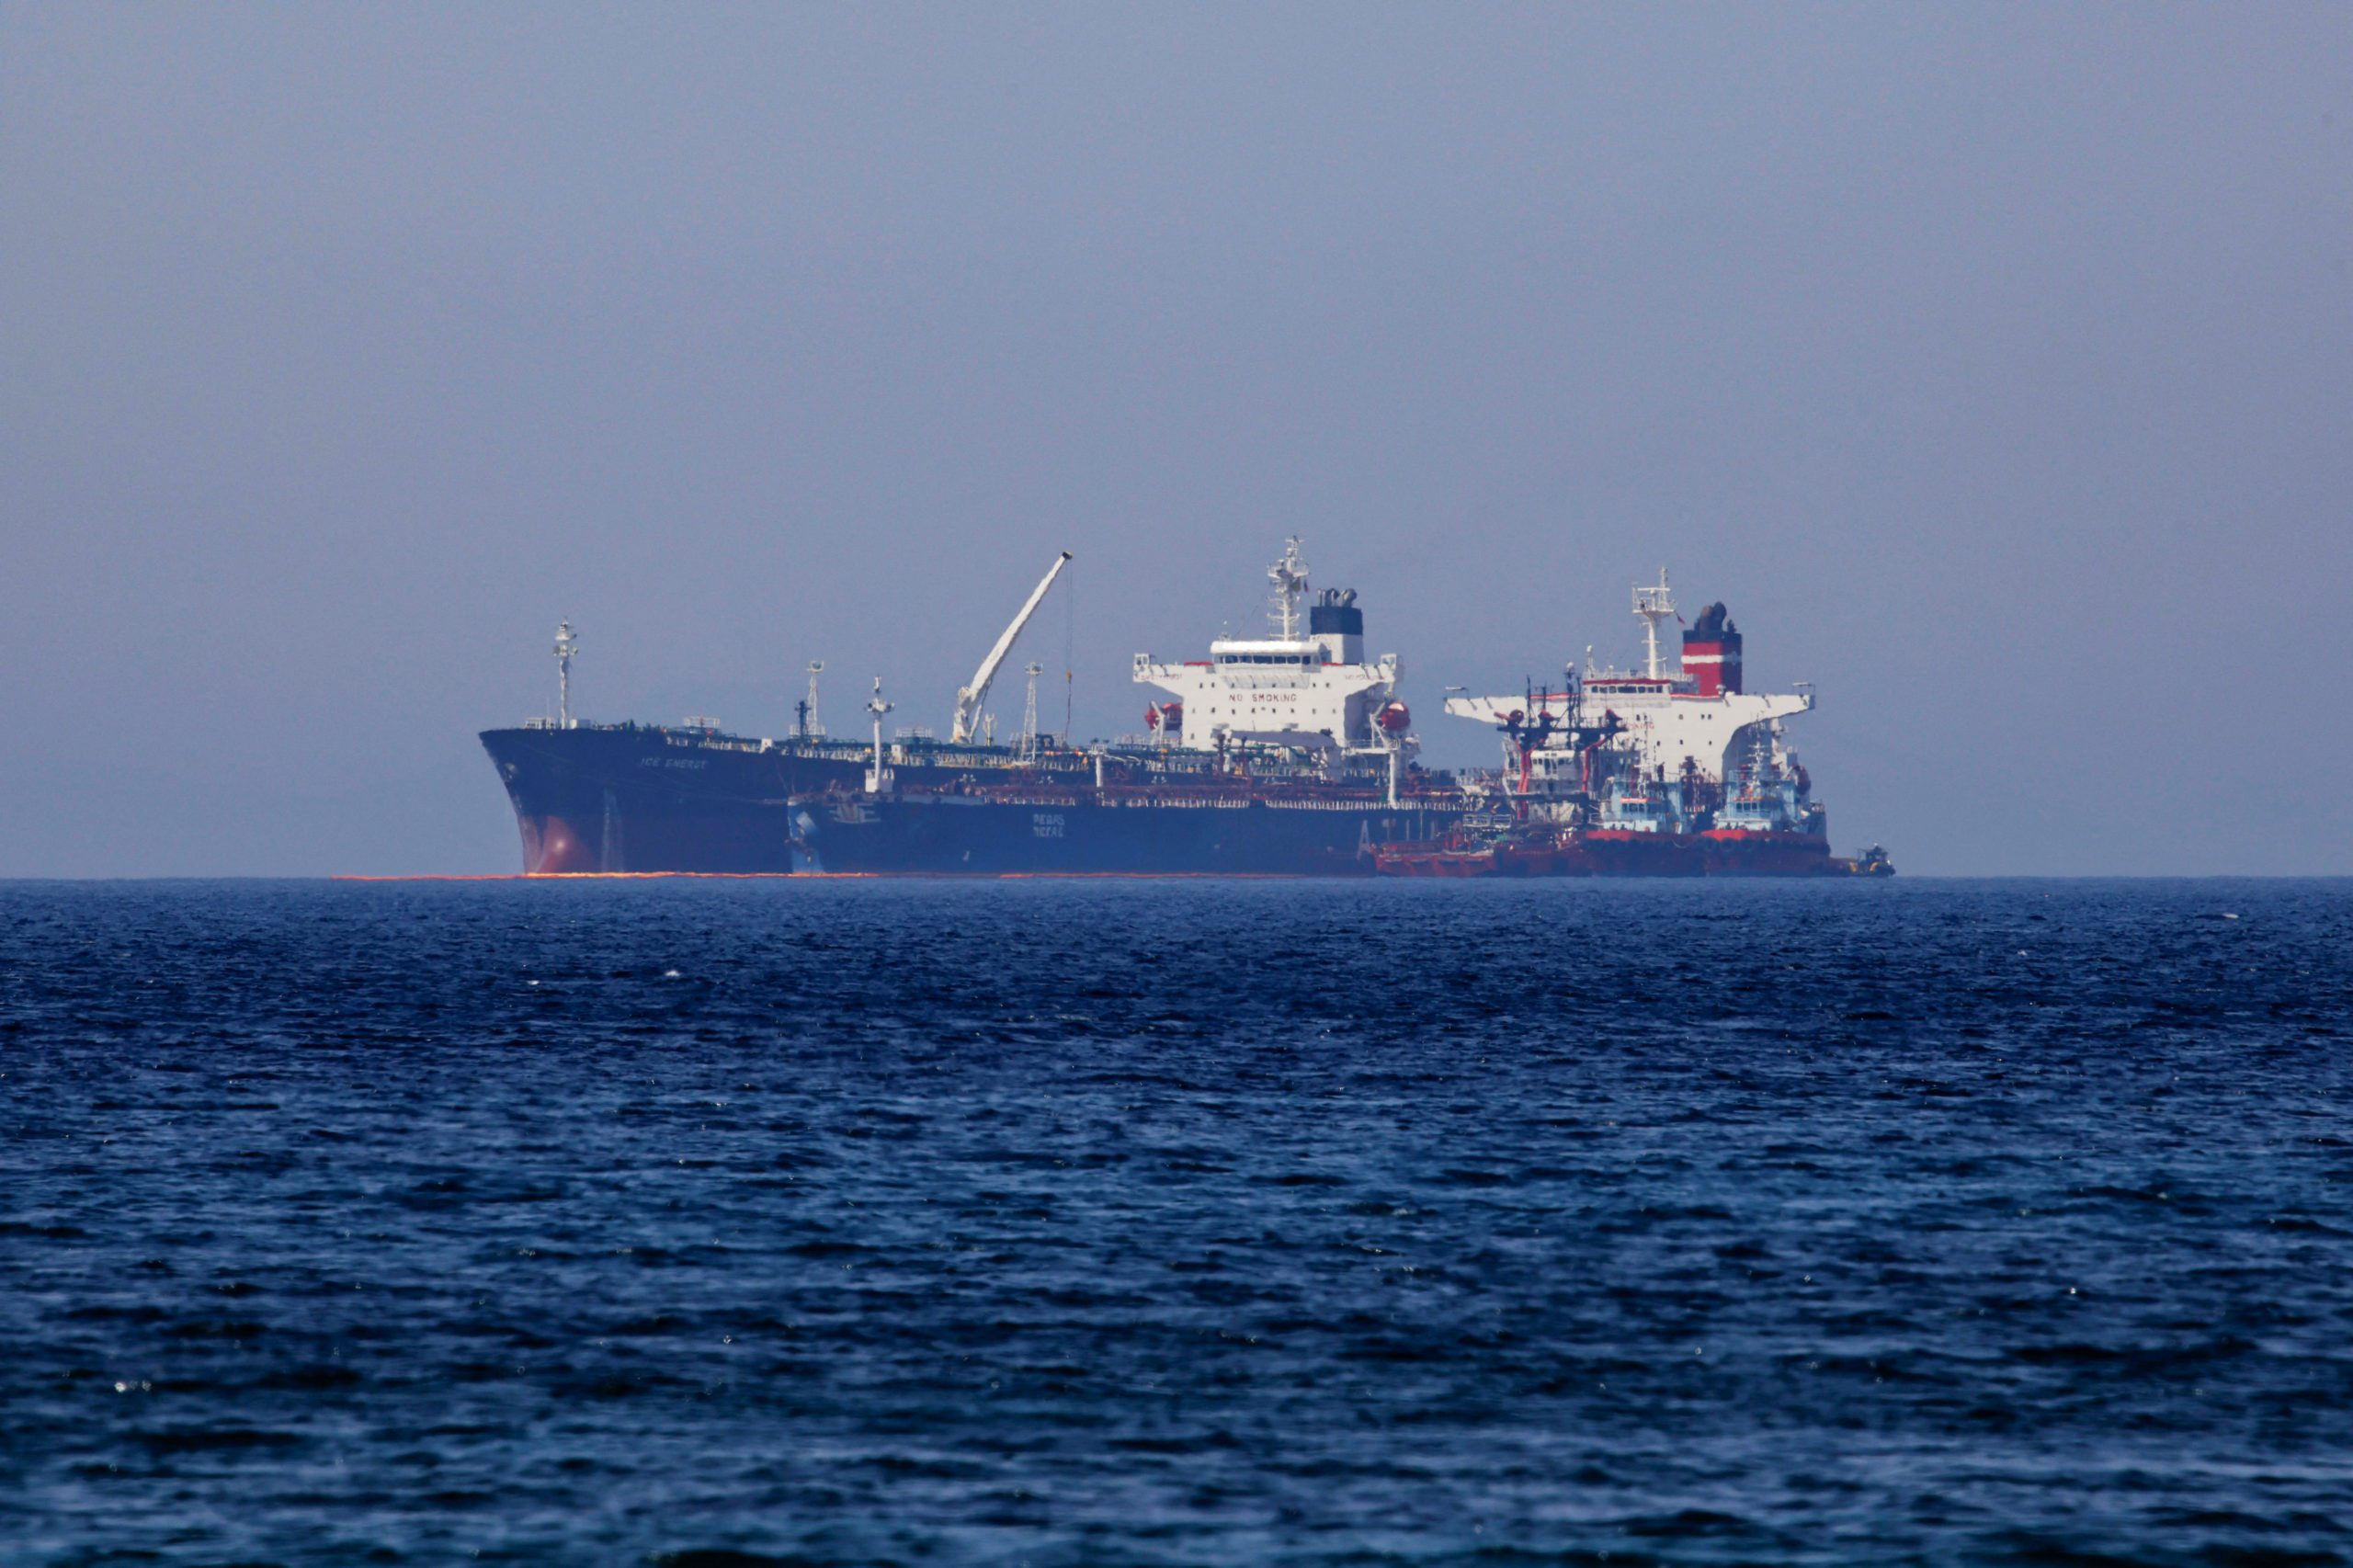 Iranian Tanker Set to Load Oil Cargo Confiscated by U.S.